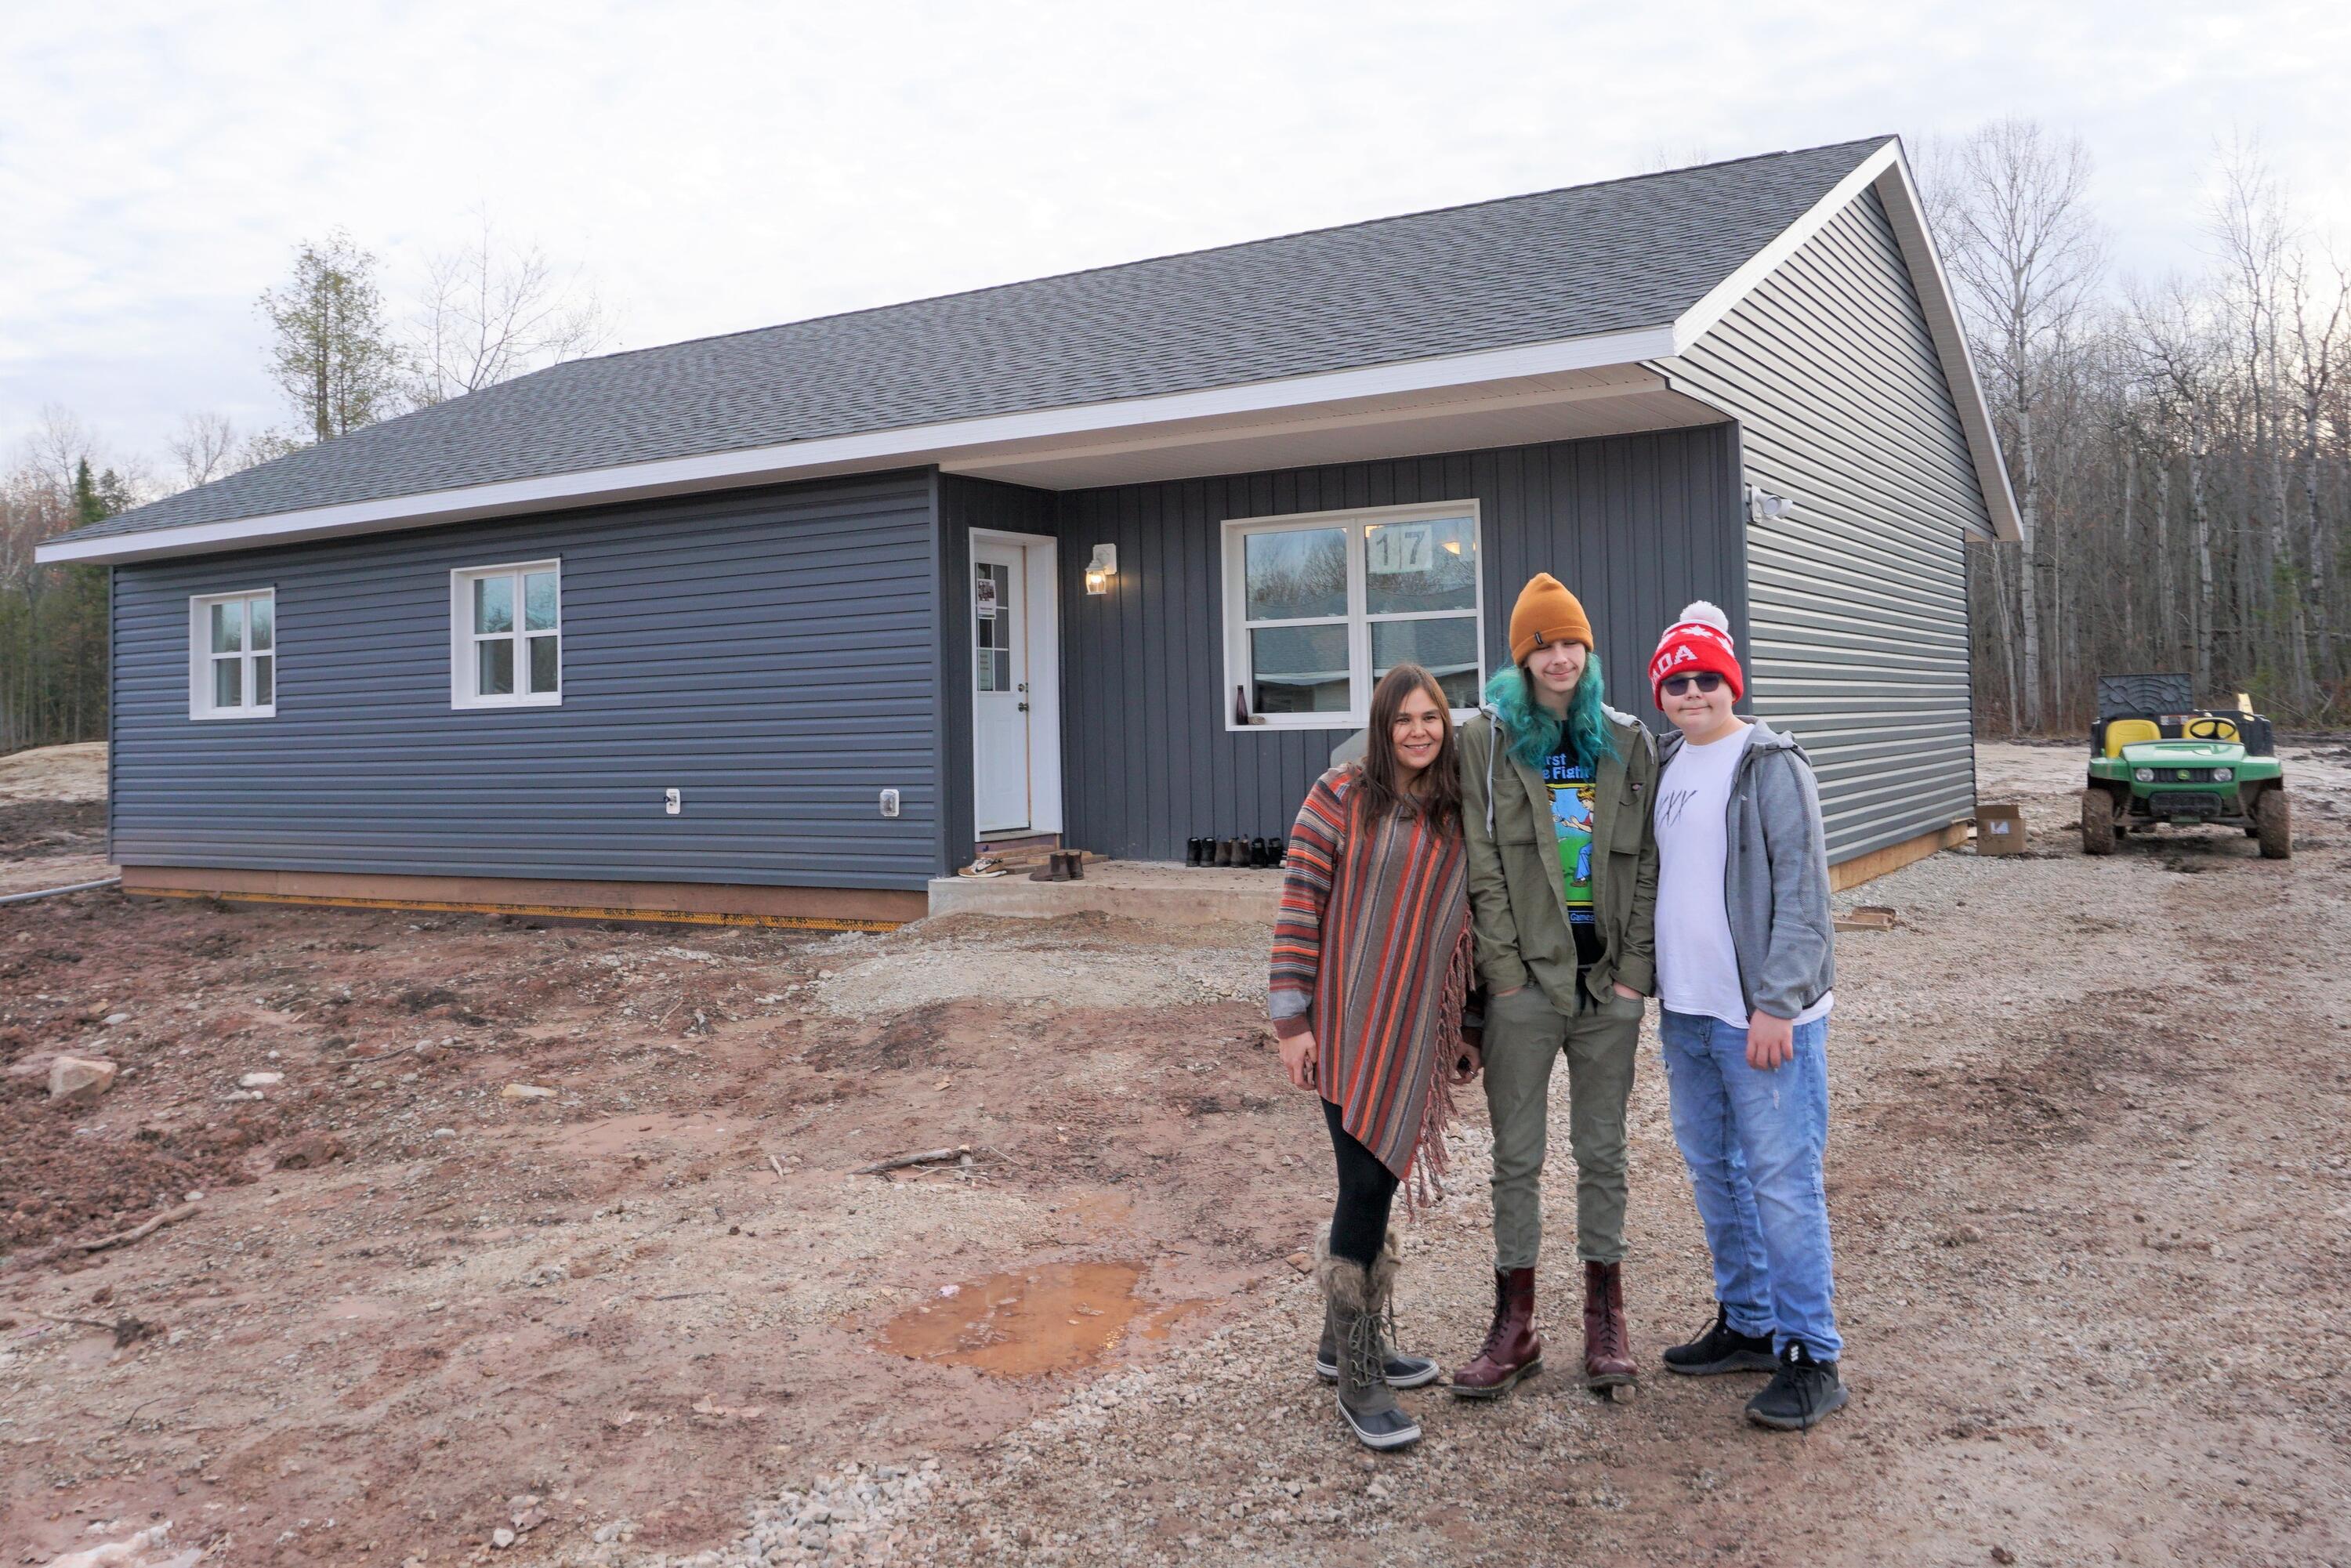 Members of Warrior Home hope to repeat their success when they built an energy efficient home for an Indigenous family.